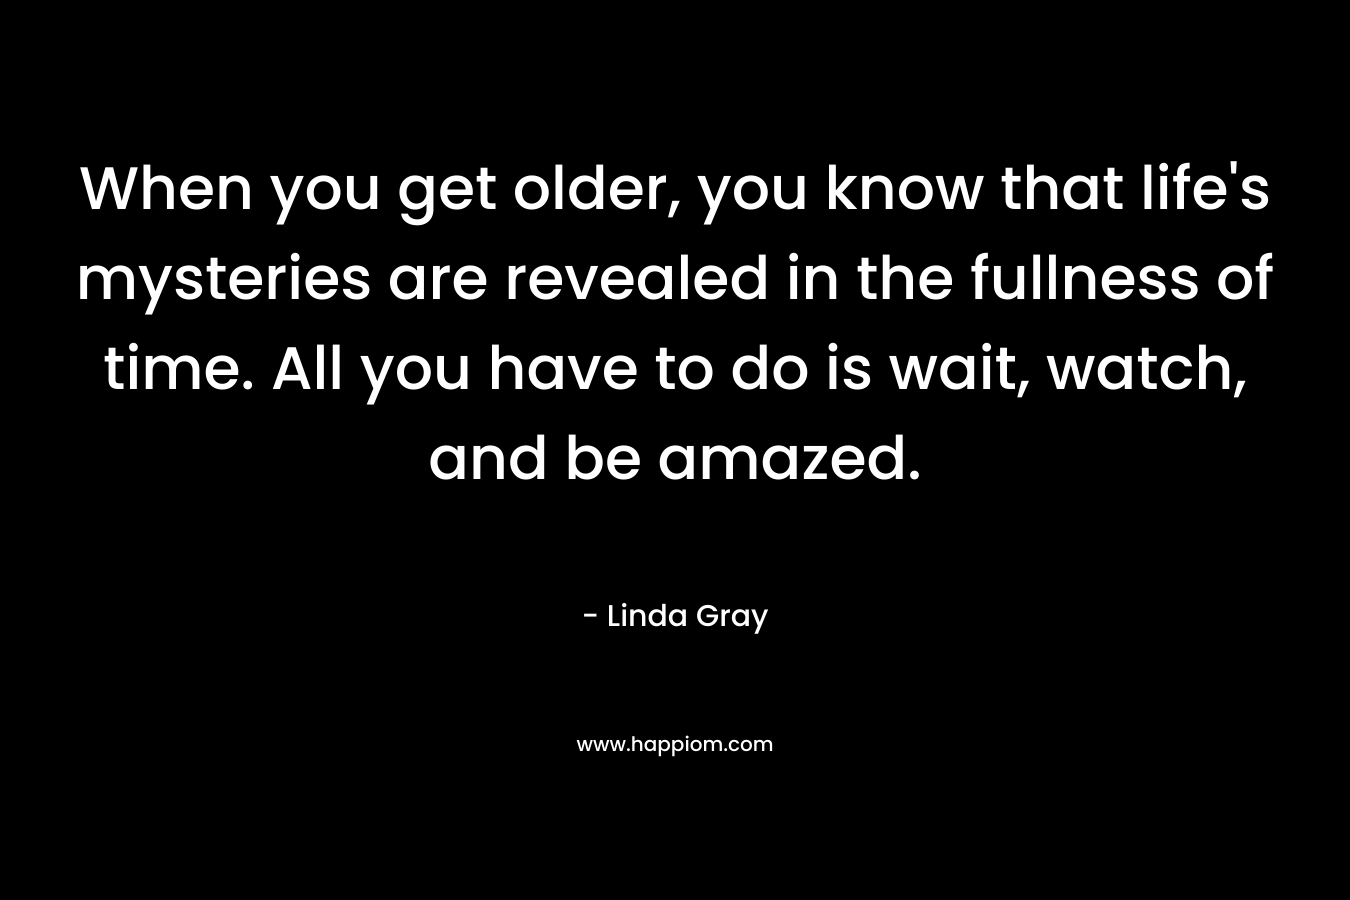 When you get older, you know that life's mysteries are revealed in the fullness of time. All you have to do is wait, watch, and be amazed.